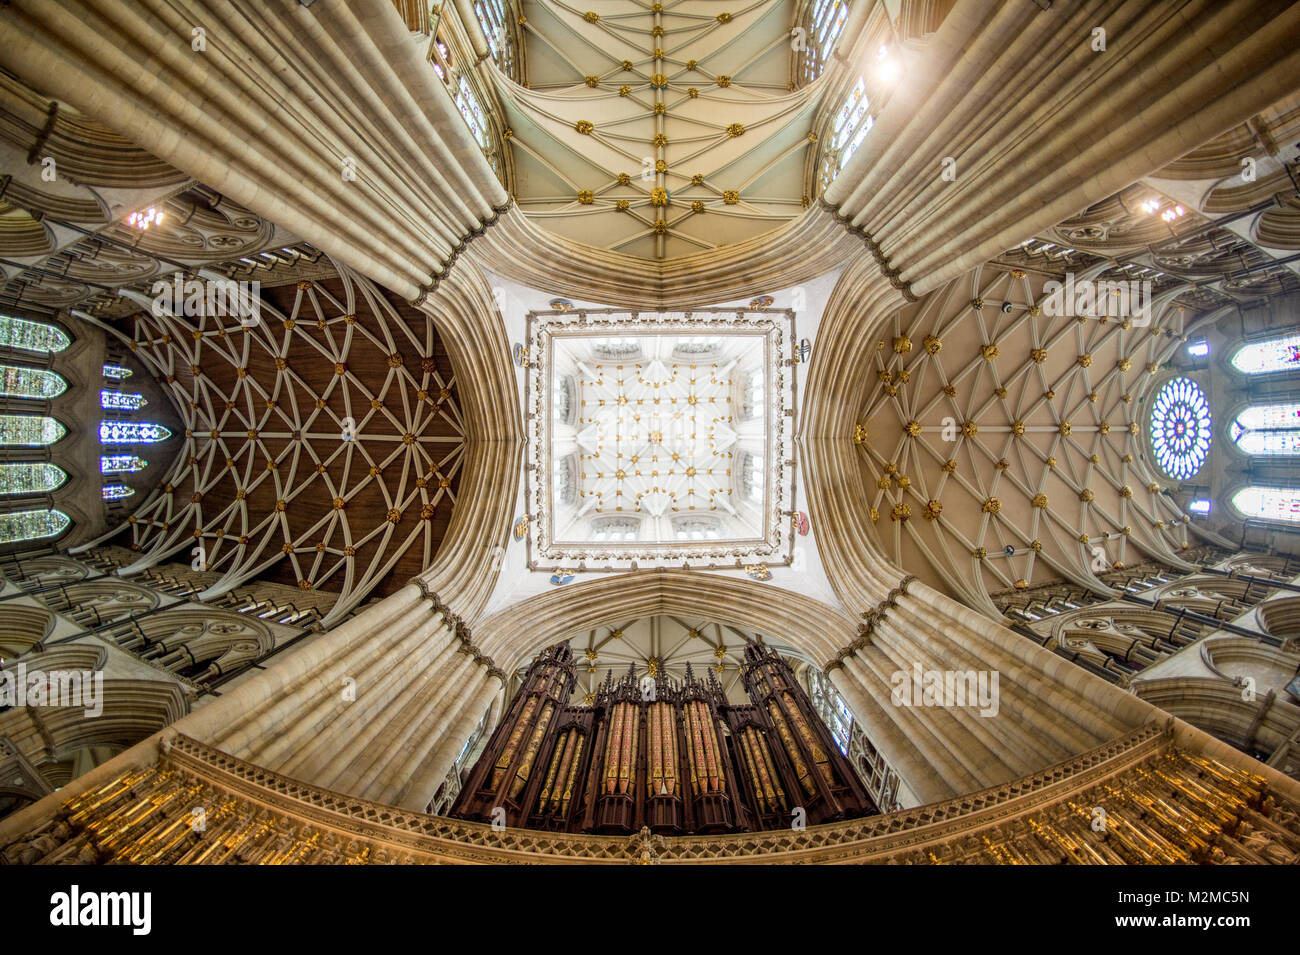 Detailed view of ceiling of York Minster Tower from directly below, York, Yorkshire, United Kingdom Stock Photo